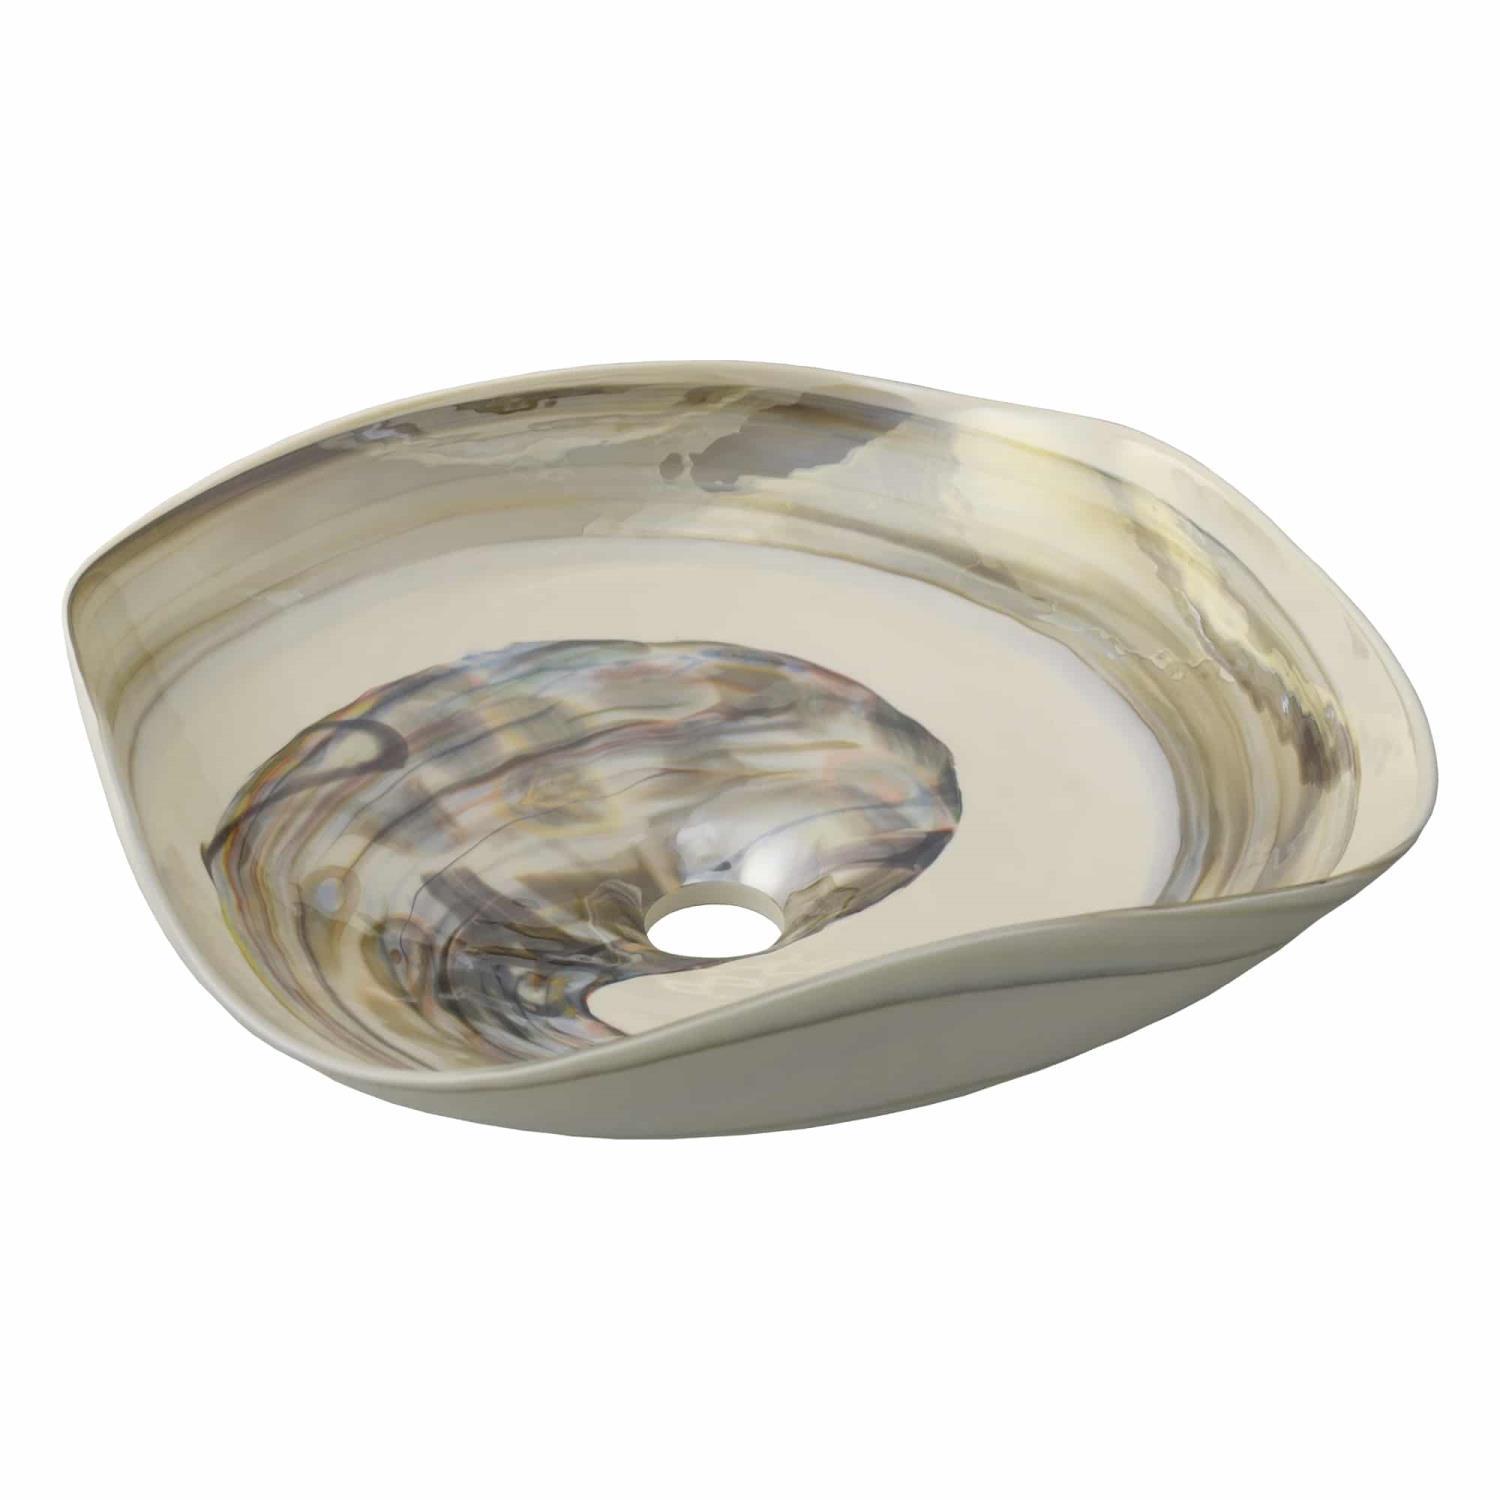 Native Trails Lido Bathroom Sink With Abalone Finish MG1515-AE